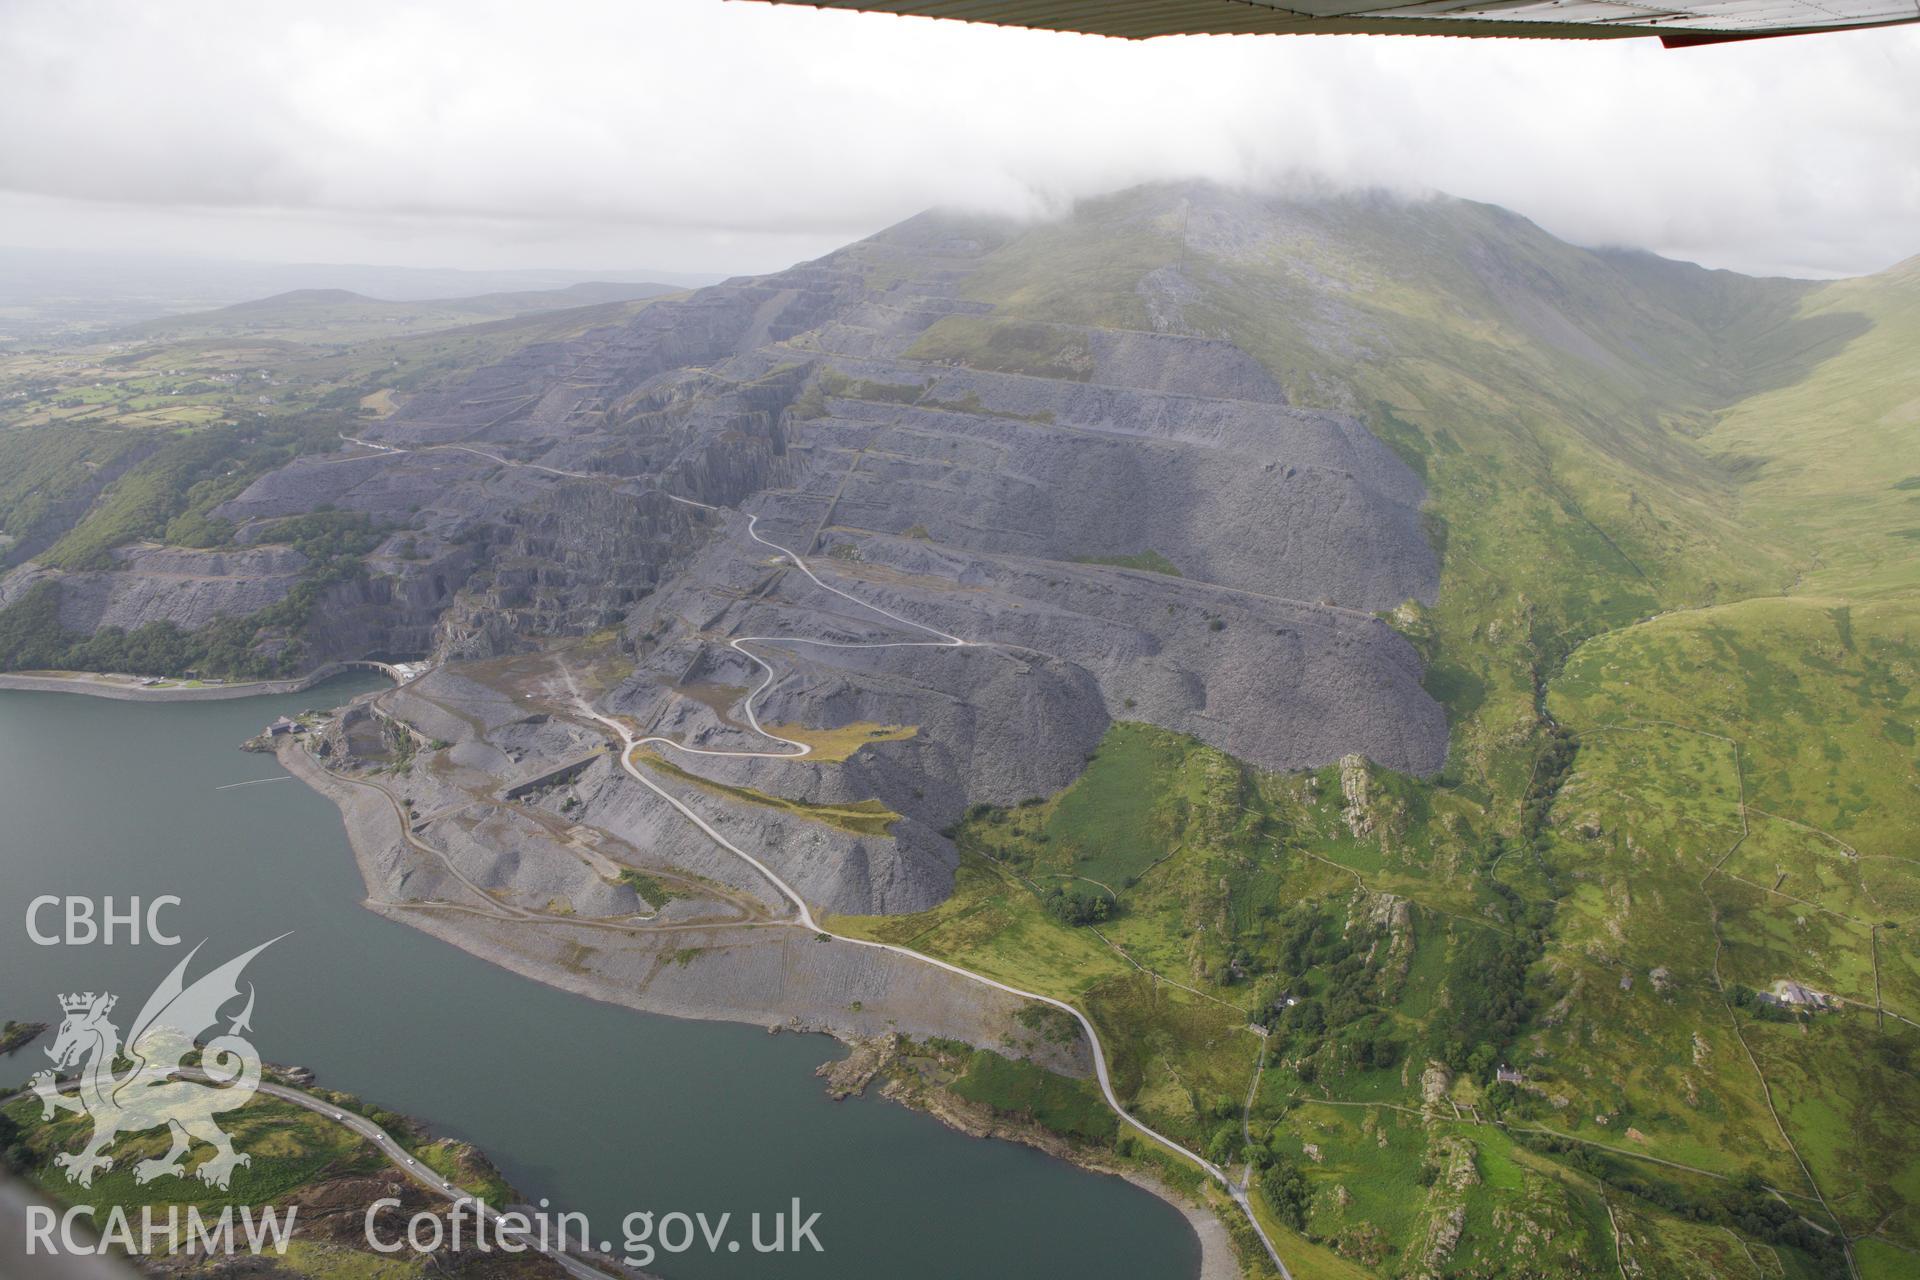 RCAHMW colour oblique aerial photograph of Dinorwic Slate Quarry and Llyn Peris. Taken on 06 August 2009 by Toby Driver